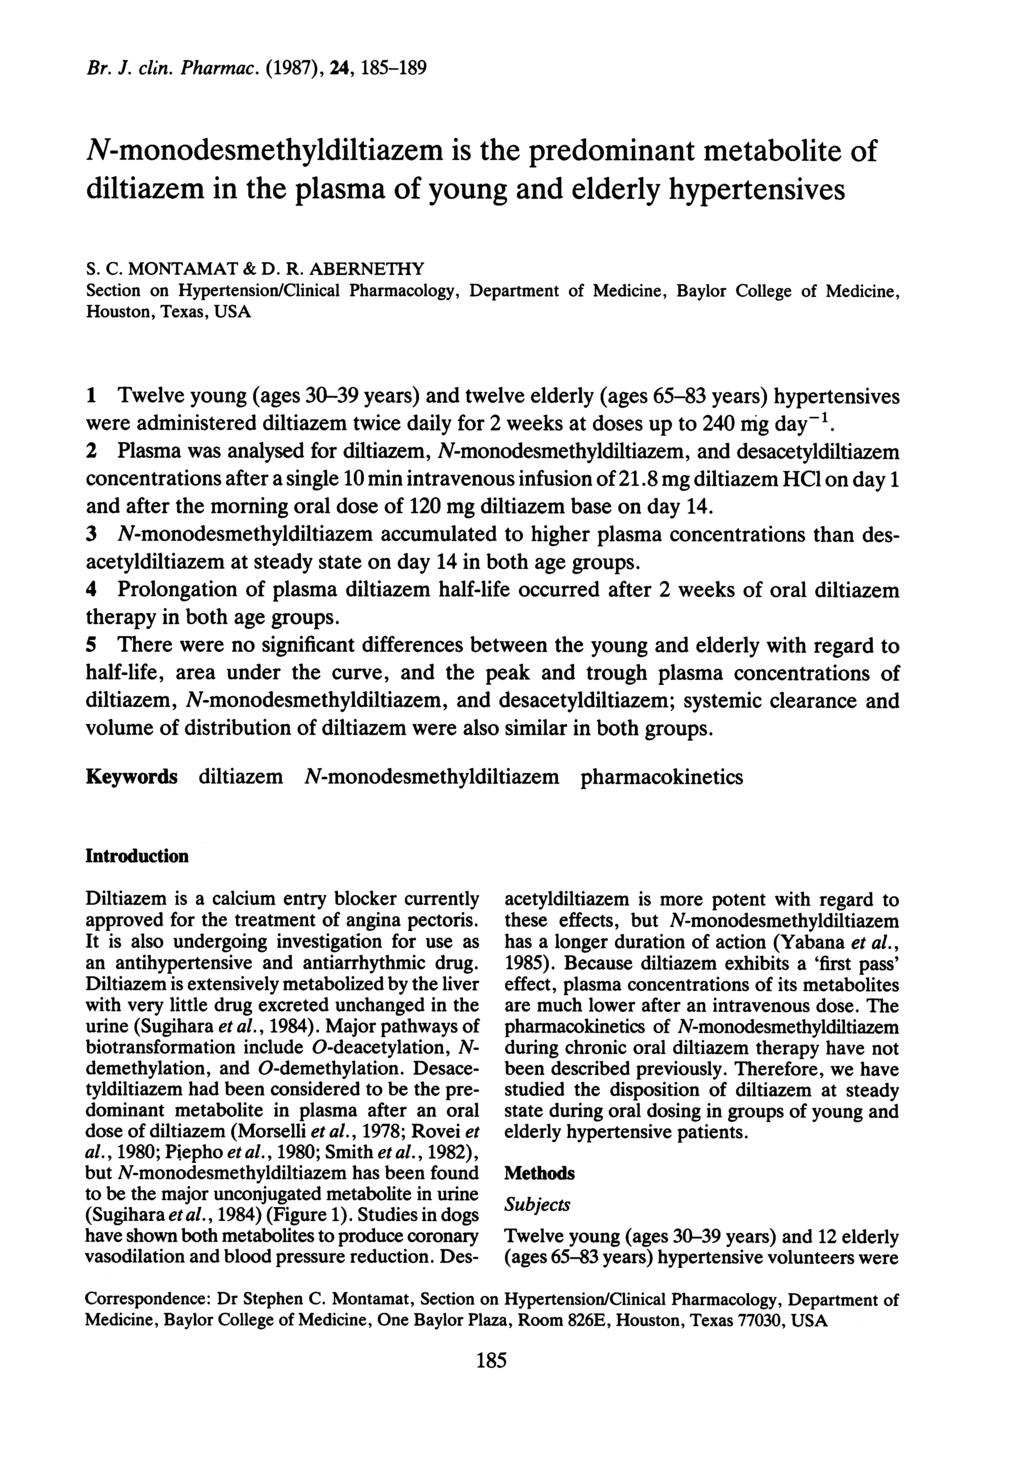 Br. J. clin. Pharmac. (1987), 24, 185-189 N-monodesmethyldiltiazem is the predominant metabolite of diltiazem in the plasma of young and elderly hypertensives S. C. MONTAMAT & D. R.